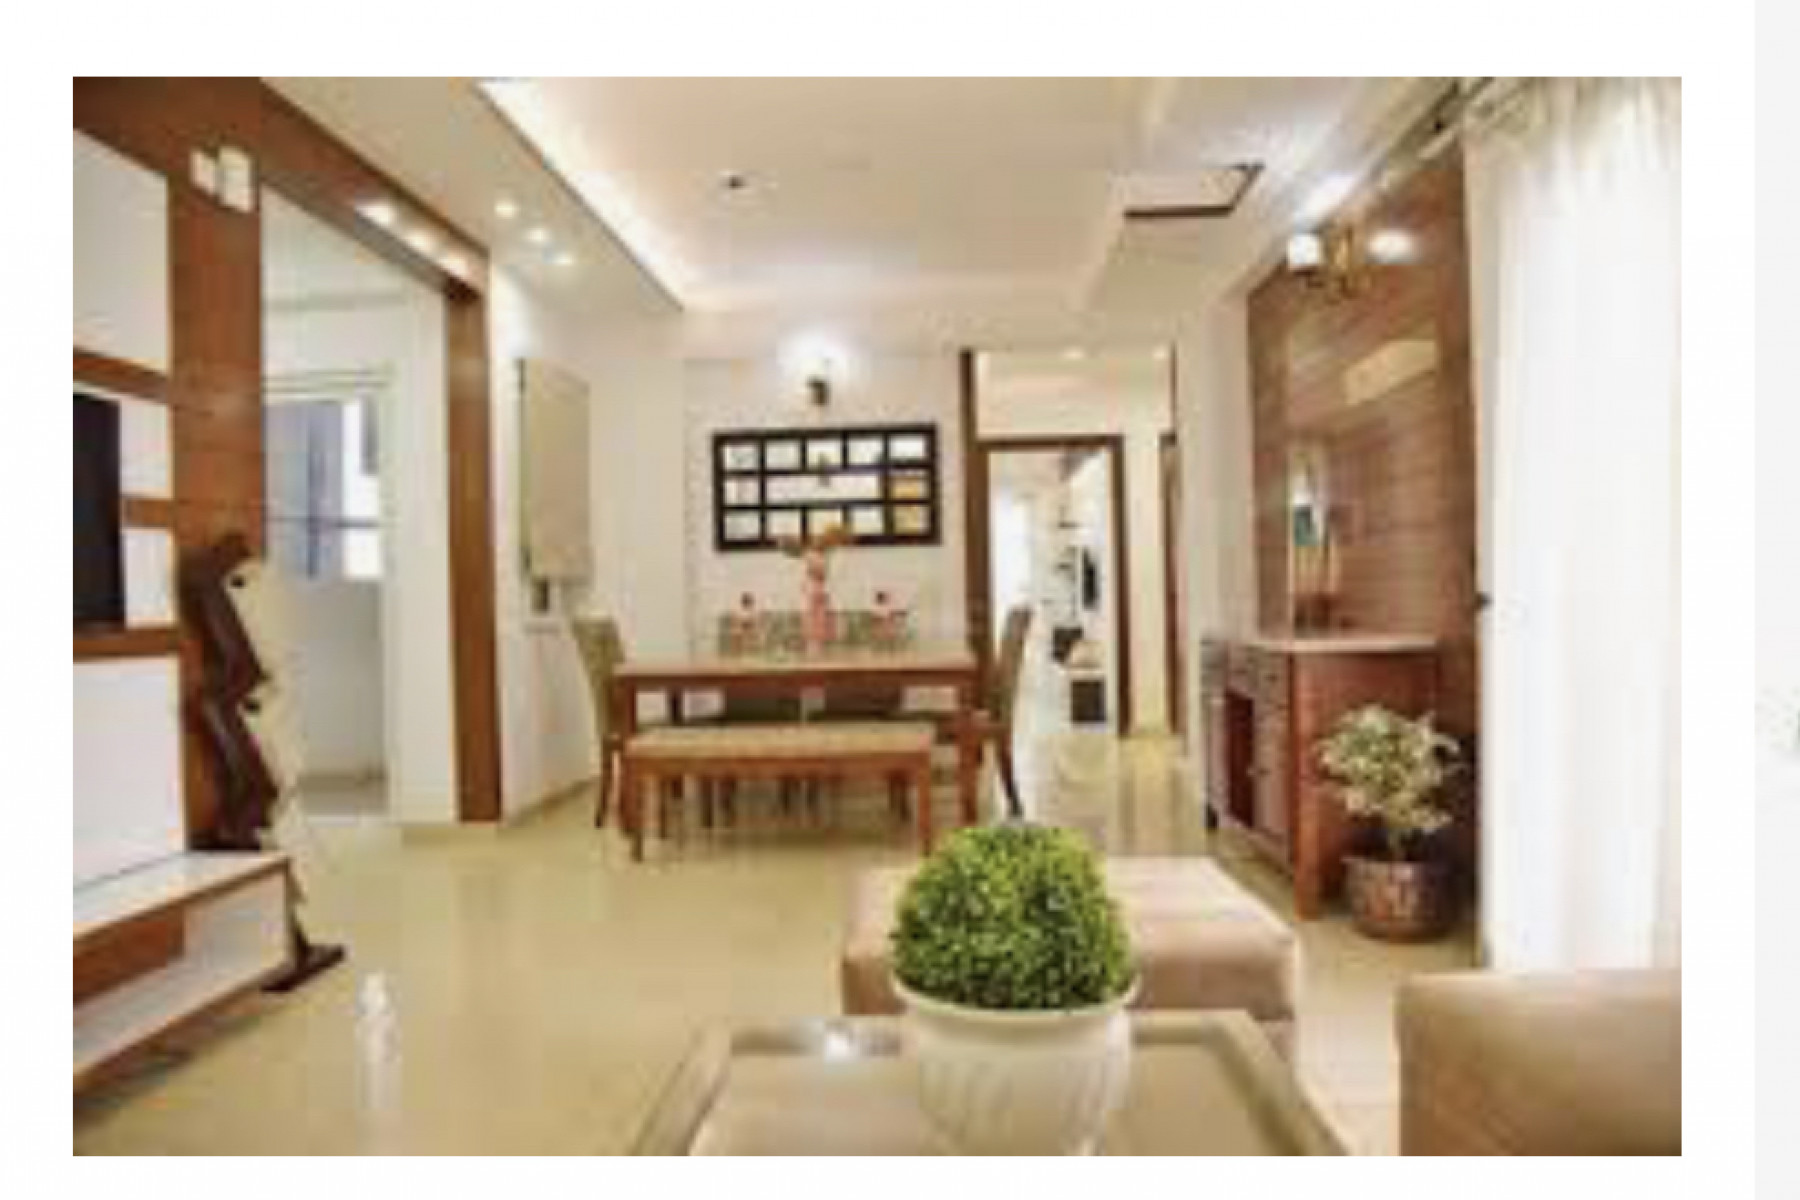 4 bhk Flat for sale in 150 feet ring road rajkot